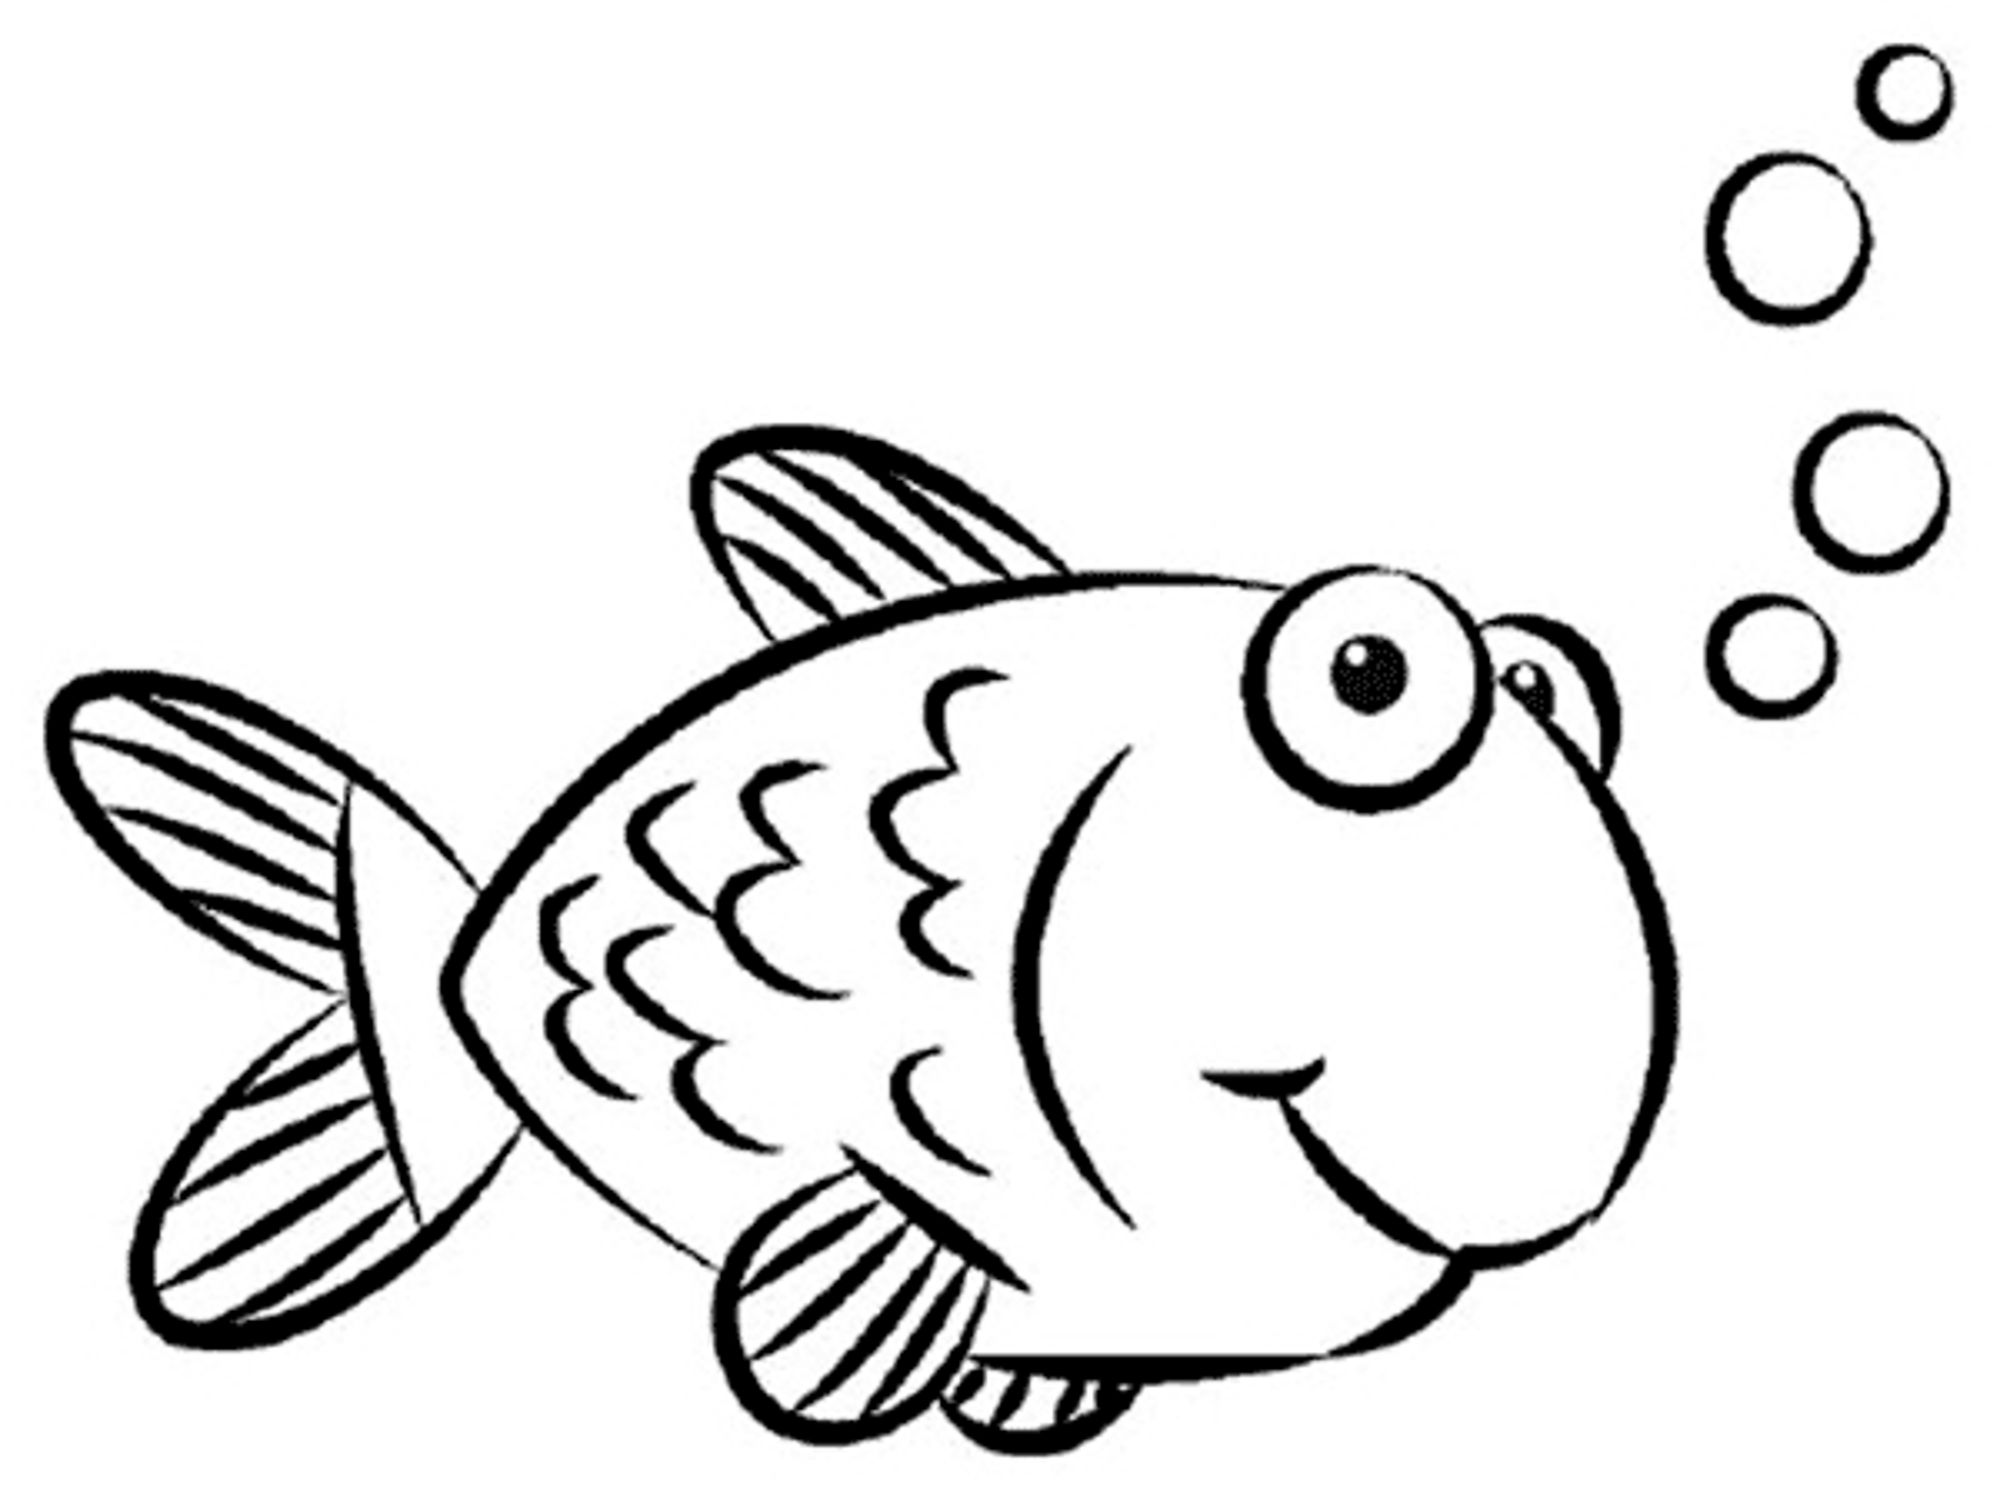 fish coloring for kids fish coloring pages for kids preschool and kindergarten coloring for fish kids 